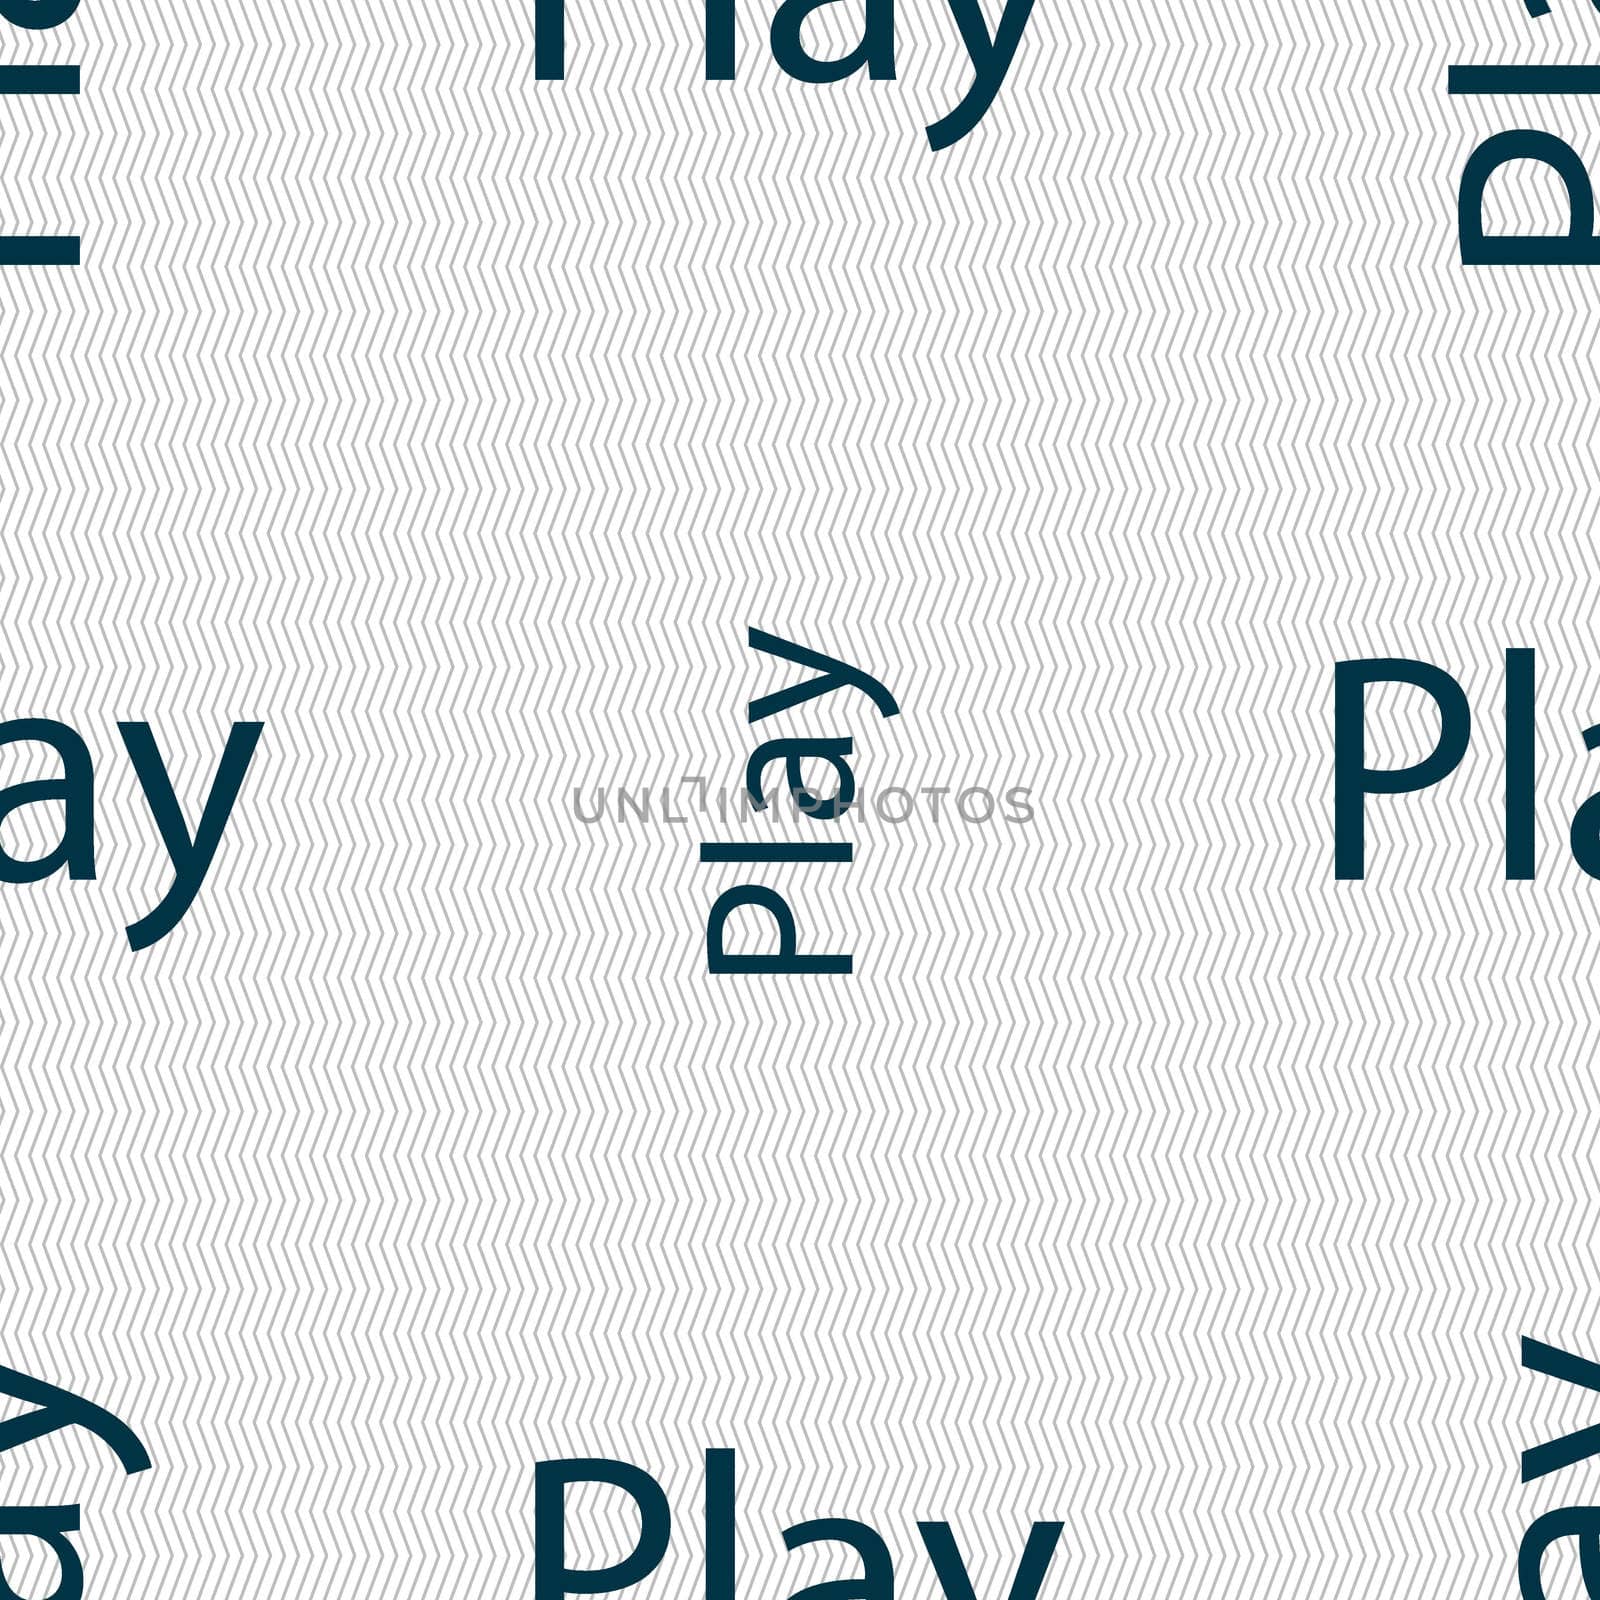 Play sign icon. symbol. Seamless abstract background with geometric shapes. illustration